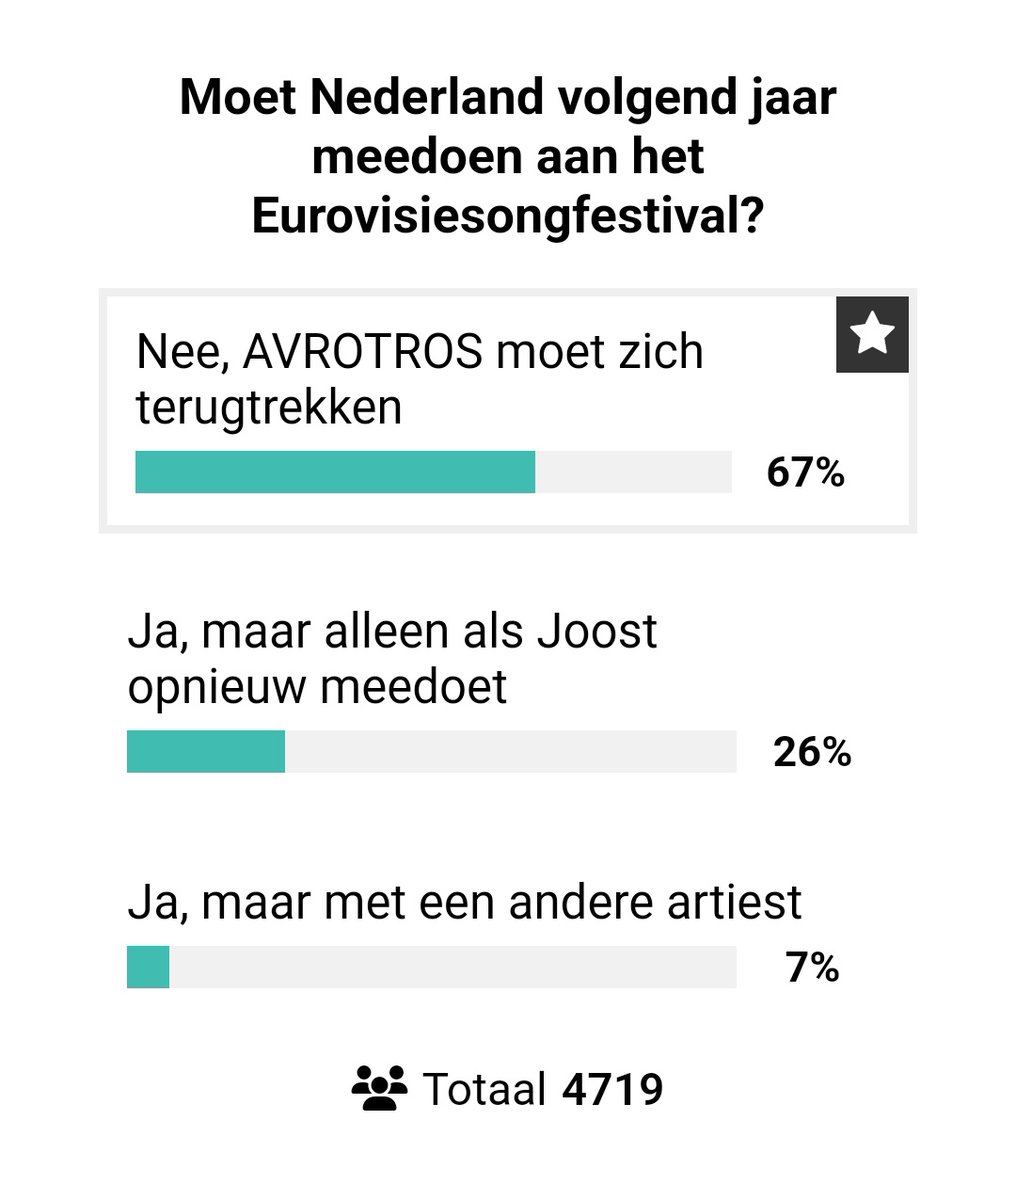 A poll that is being conducted by RTL, asks whether the Netherlands should participate in Eurovision next year and it's currently being voted with 'no' by a 67%, while 26% answered that 'we should only participate if Joost represents us'.